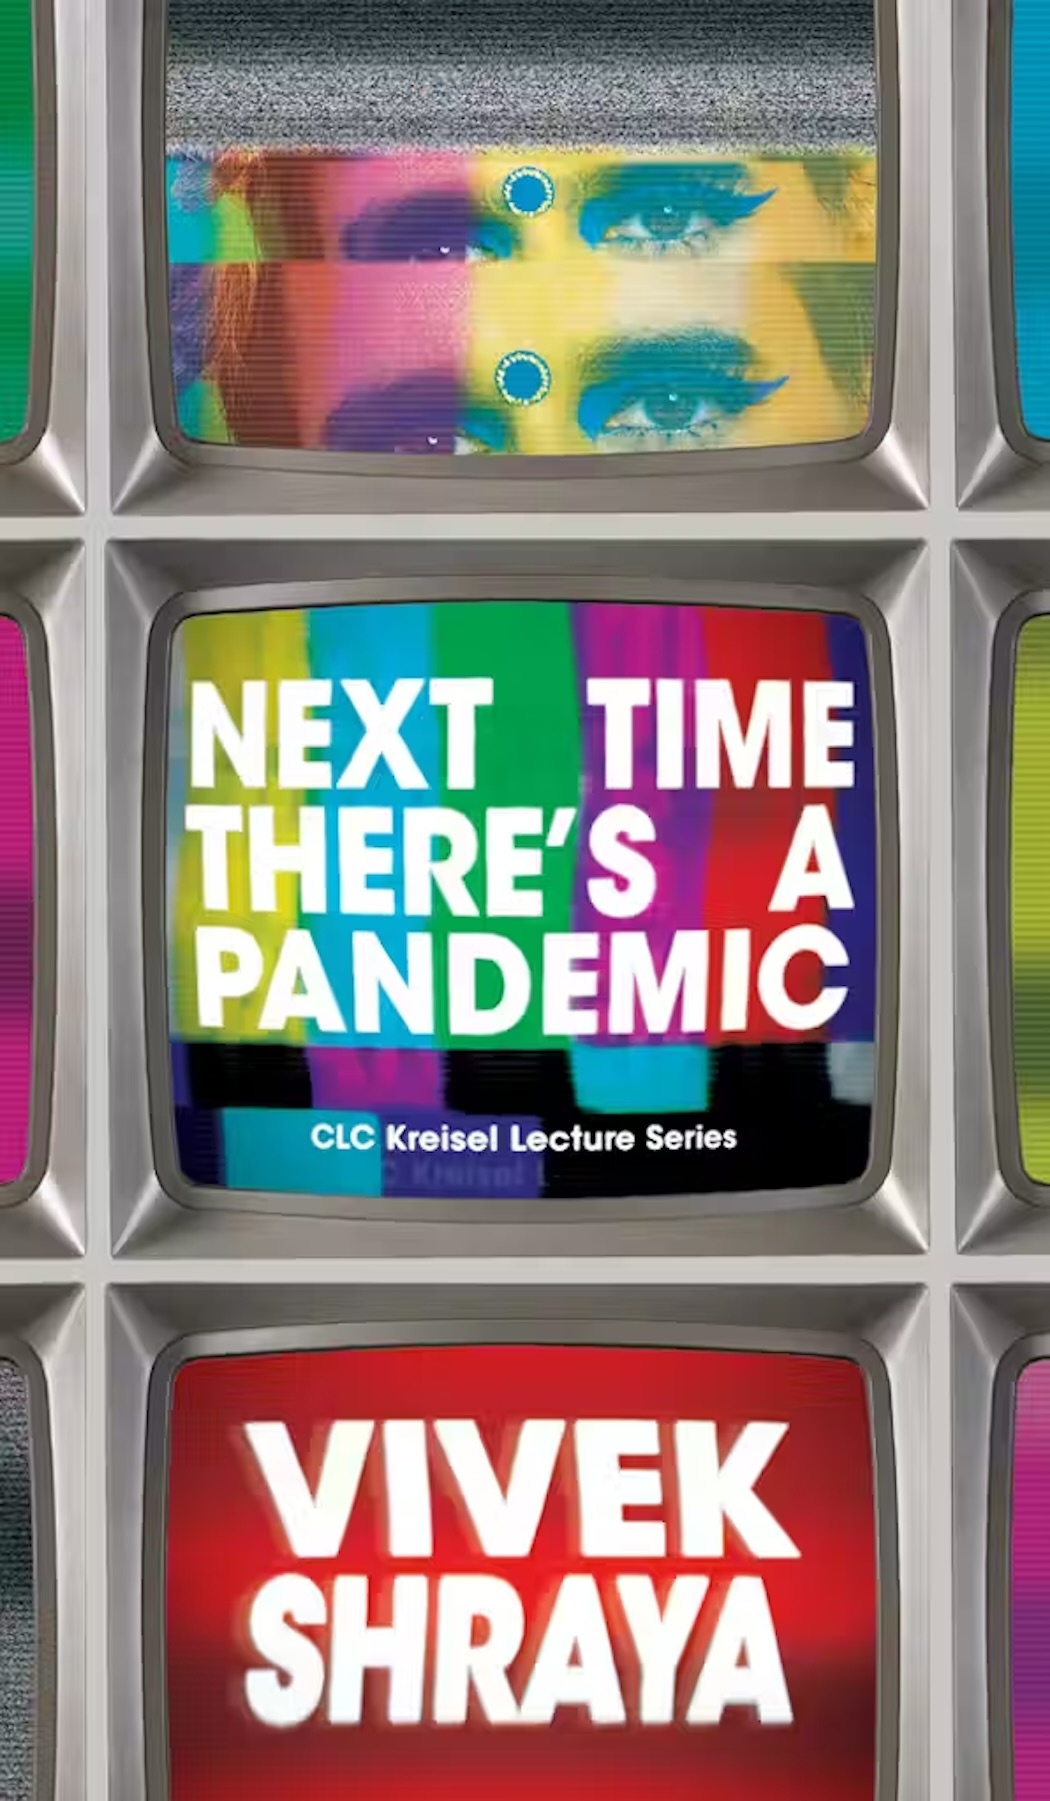 Cover Image of Vivek Shraya's Kreisel Publication Titled Next Time There's a Pandemic